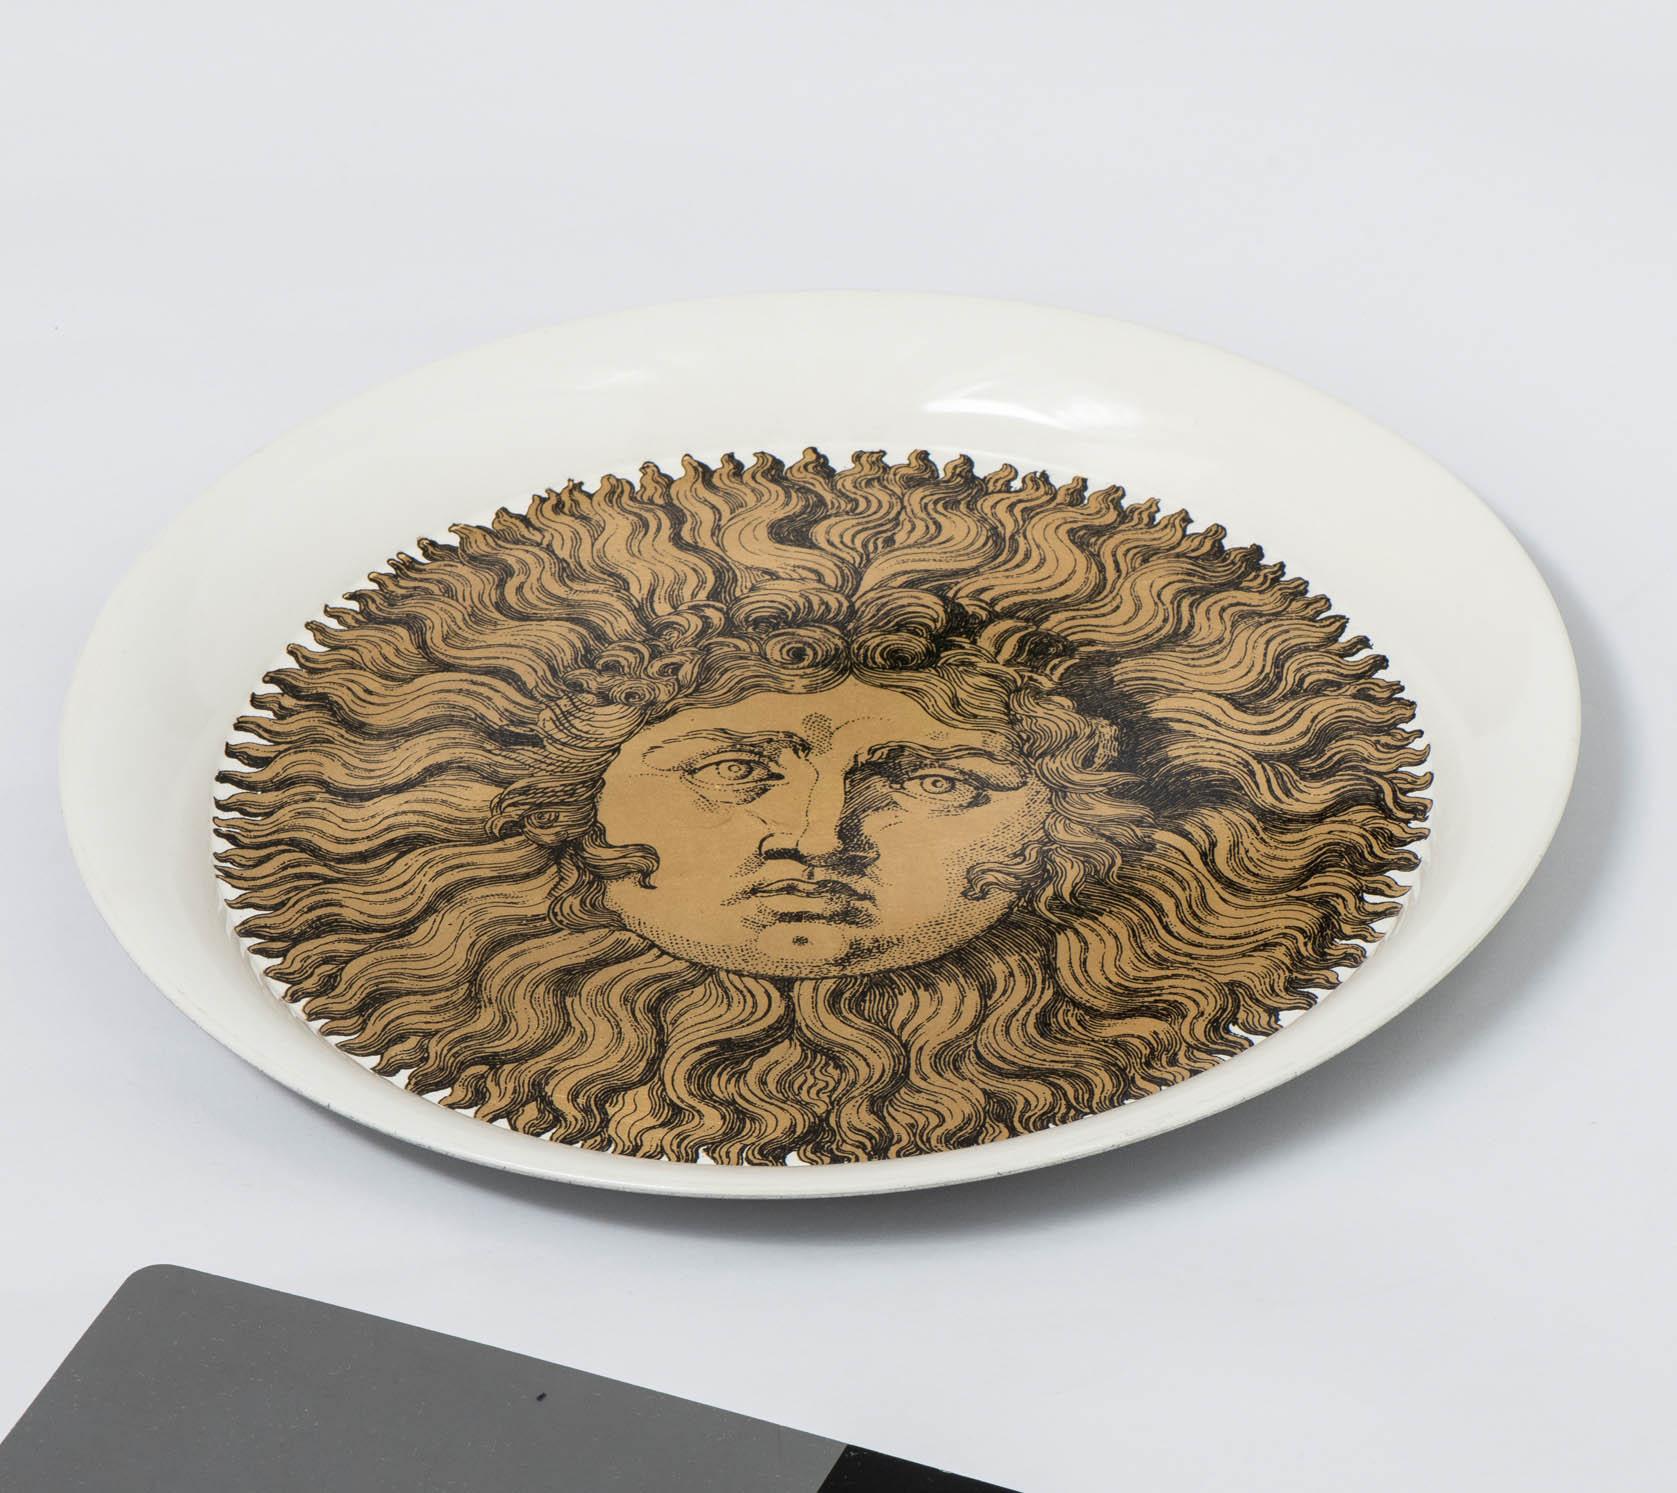 A Piero Fornasetti tray.
“Sole”.
Lithographically printed.
Hand colored and gilt highlighted on white ground.
Metal.
Italy,
circa 1960.
Measures: 39.5 cm diameter x 3 cm high.
 